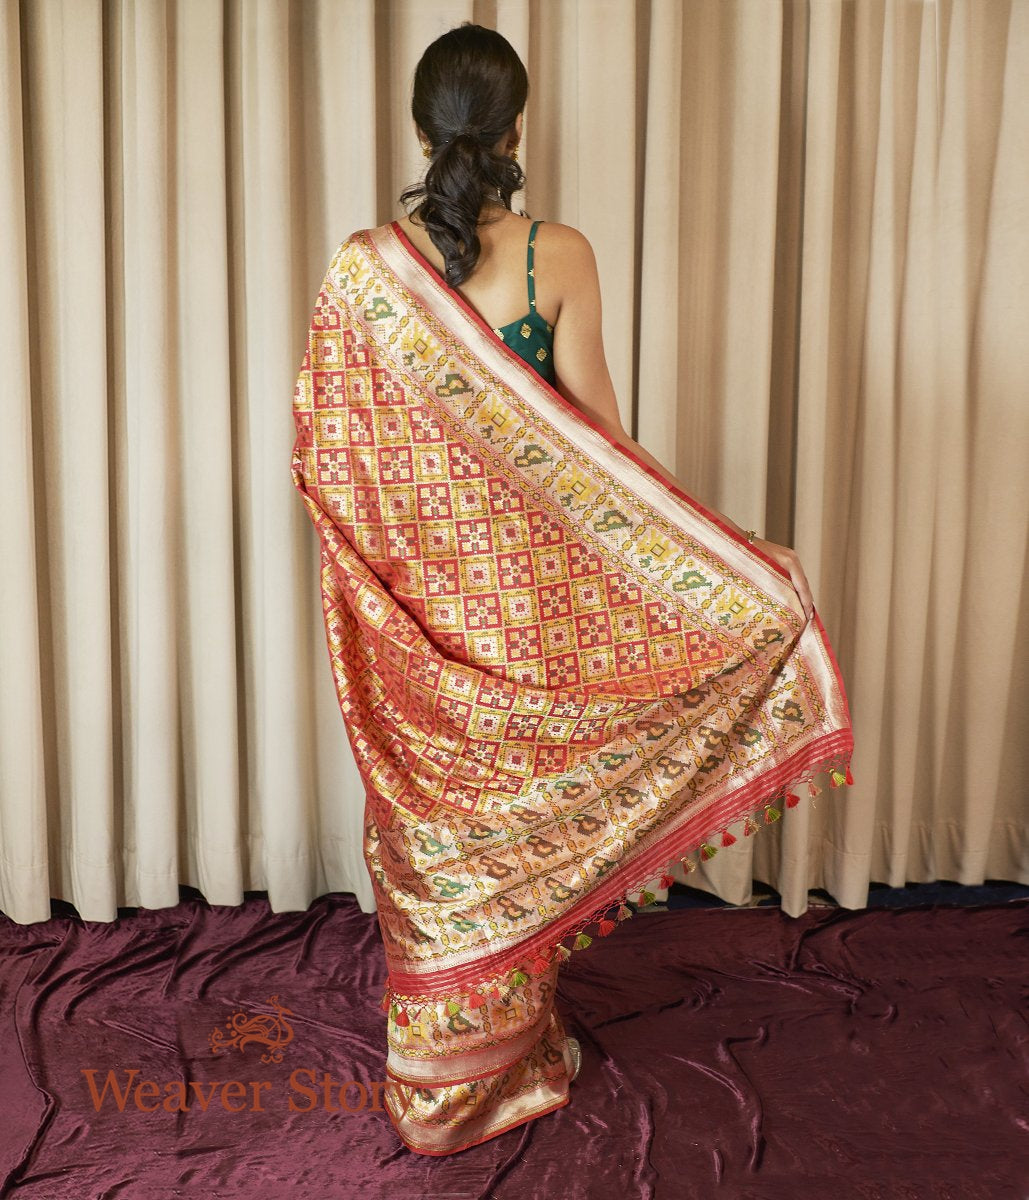 Handwoven_Red_and_Yellow_Meenakari_Patola_Saree_with_Parrots_on_the_Border_WeaverStory_03